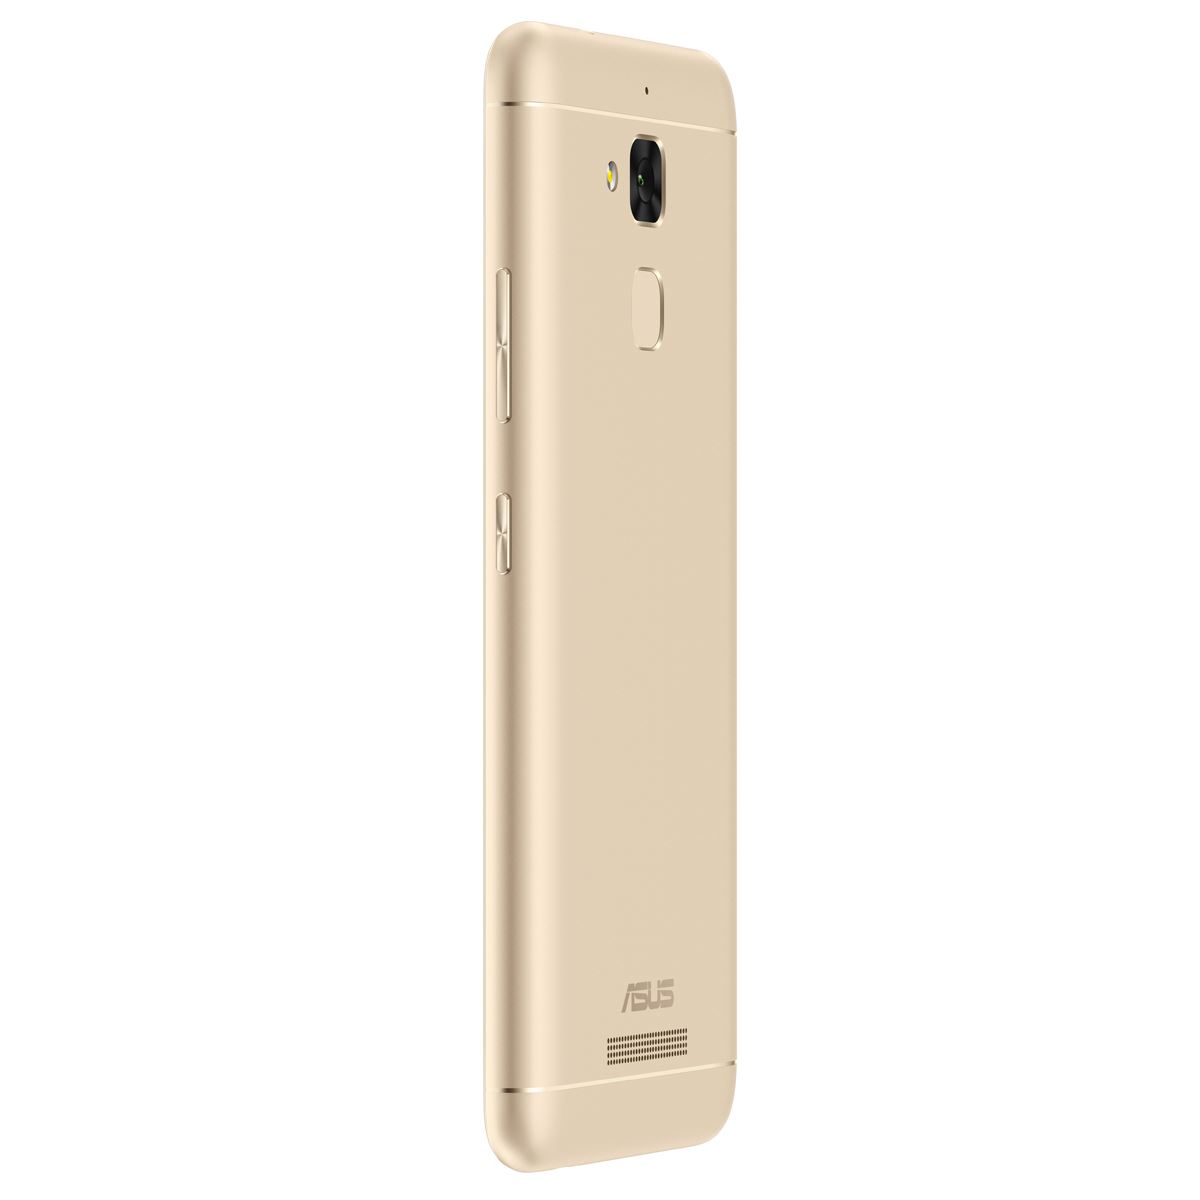 Phablet Asus Zenfone 32GB Max Gold